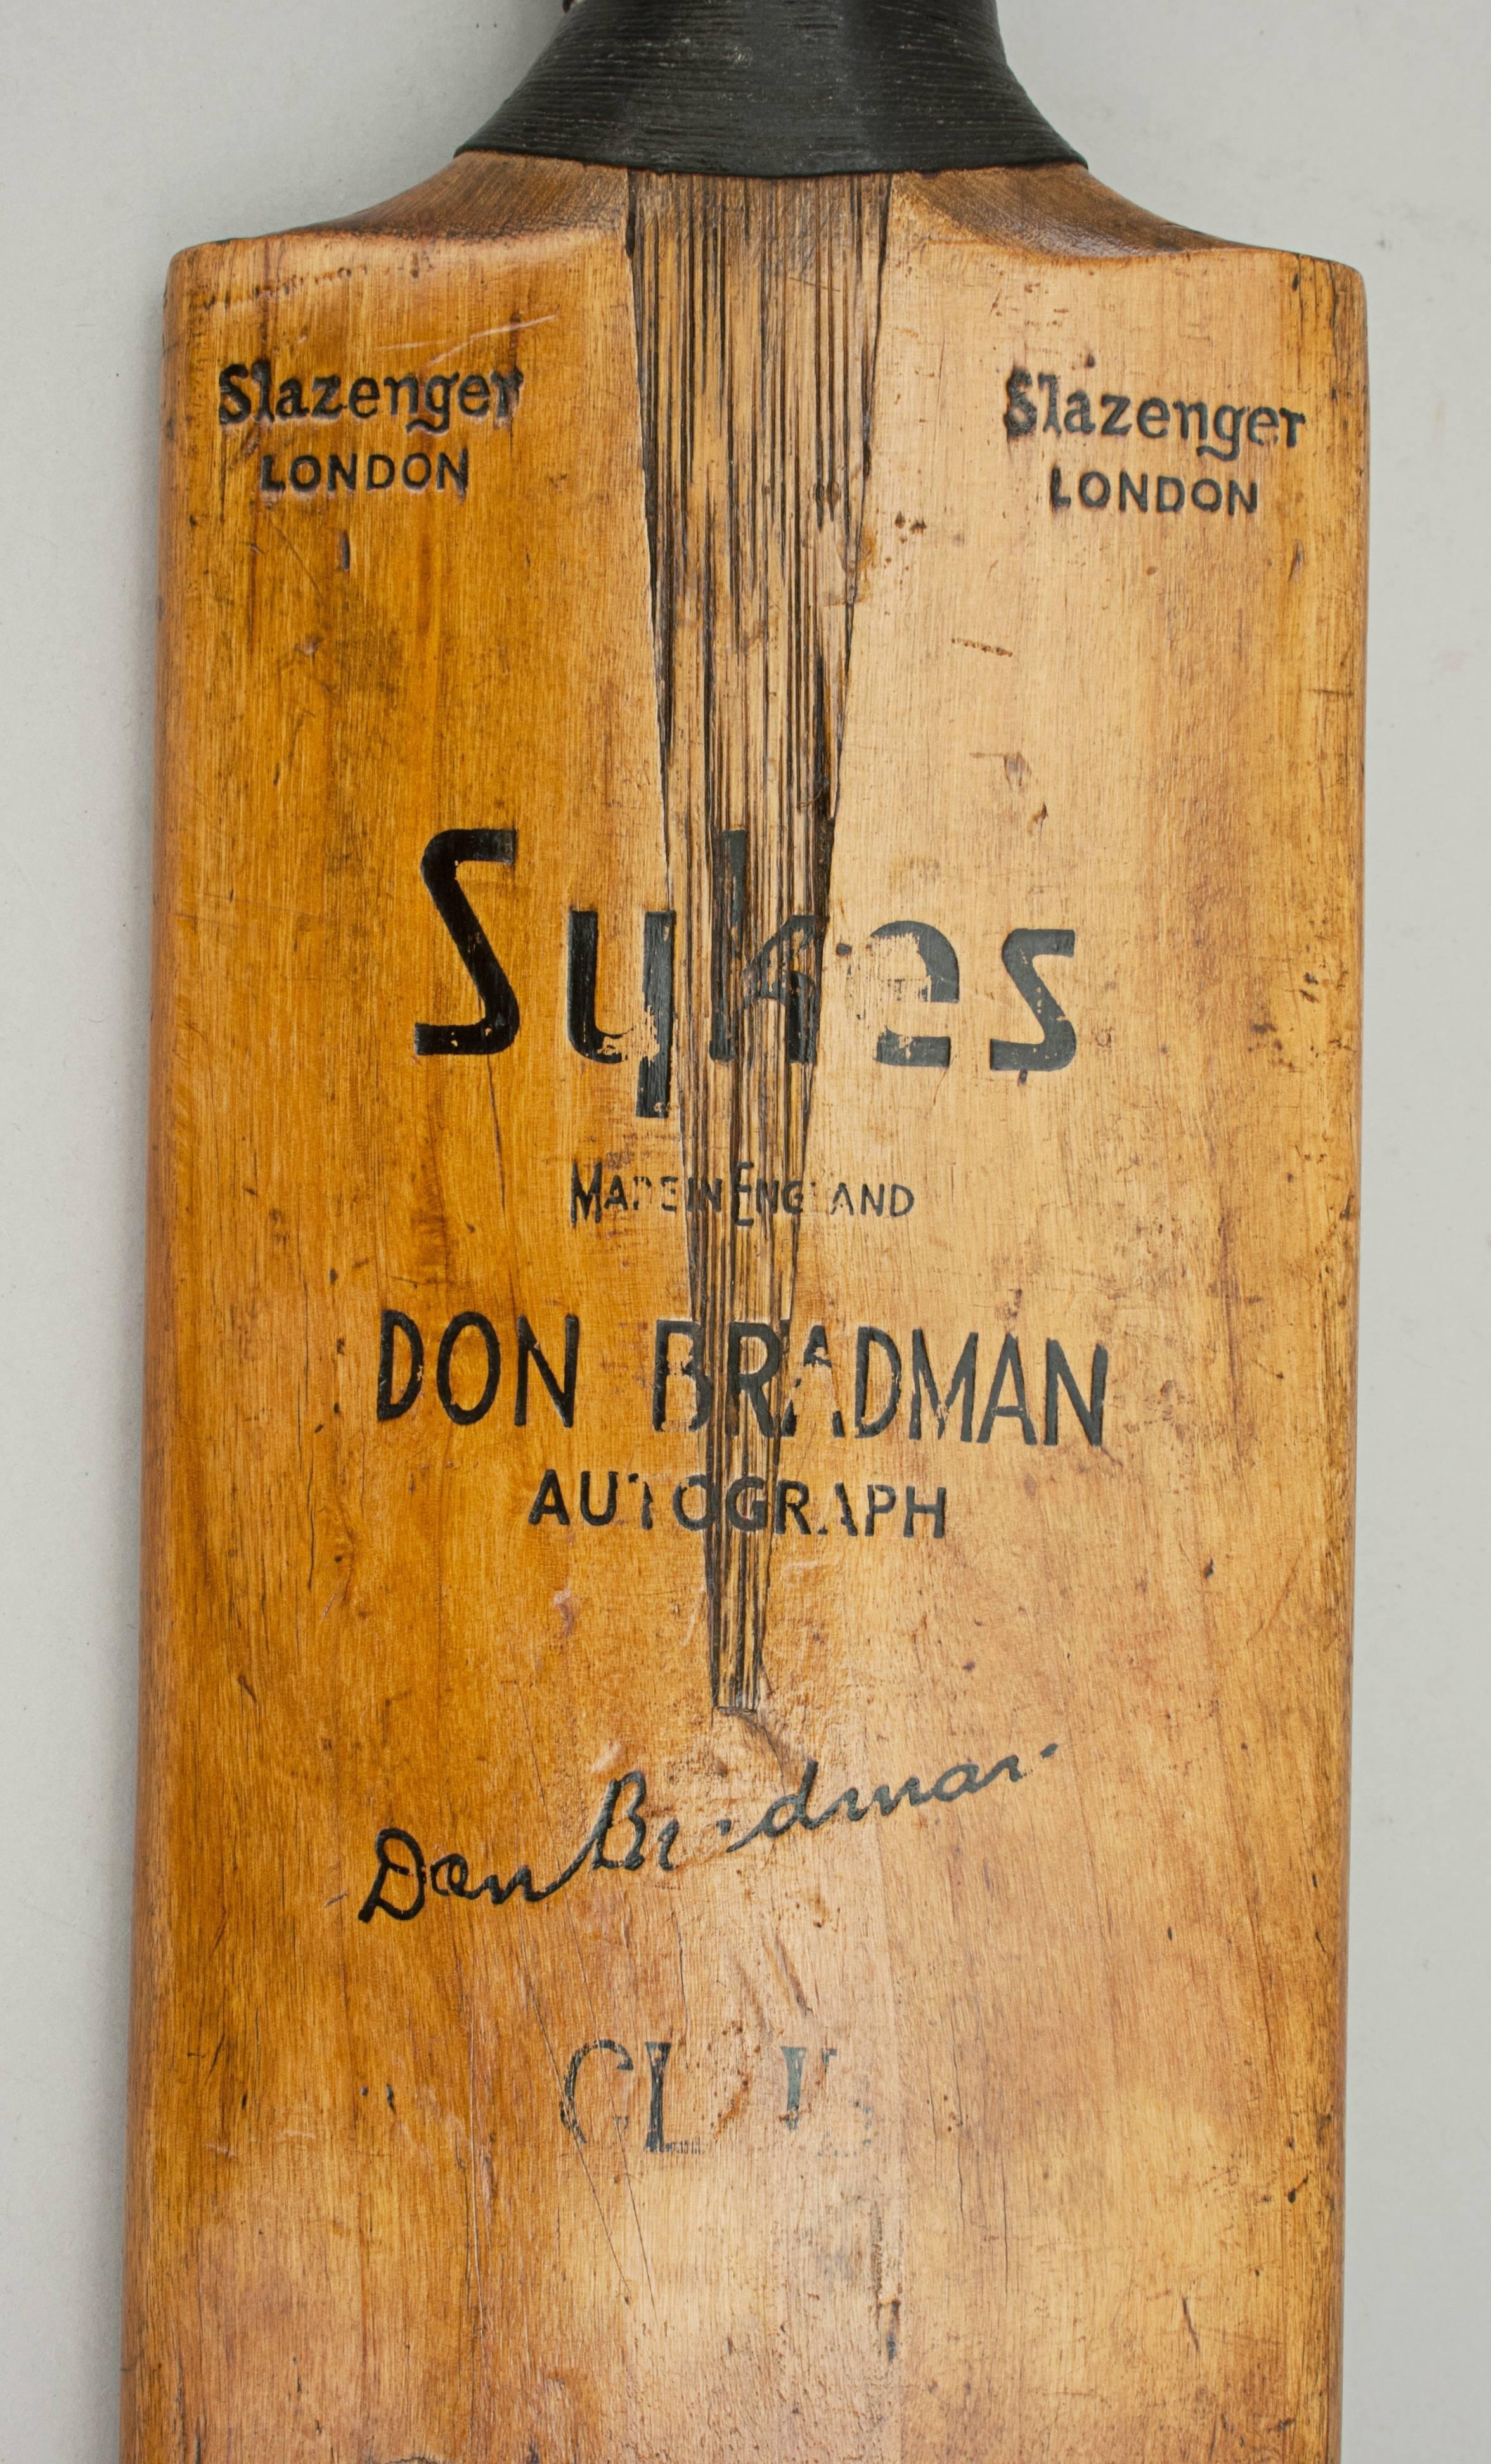 Sykes, Bradman cricket bat.
A fine Sykes 'Don Bradman' autograph cricket bat. The blade is clean and in good condition with a cord strung grip and triple sprung handle. The shoulders are embossed 'Slazenger' London, the blade with a facsimile